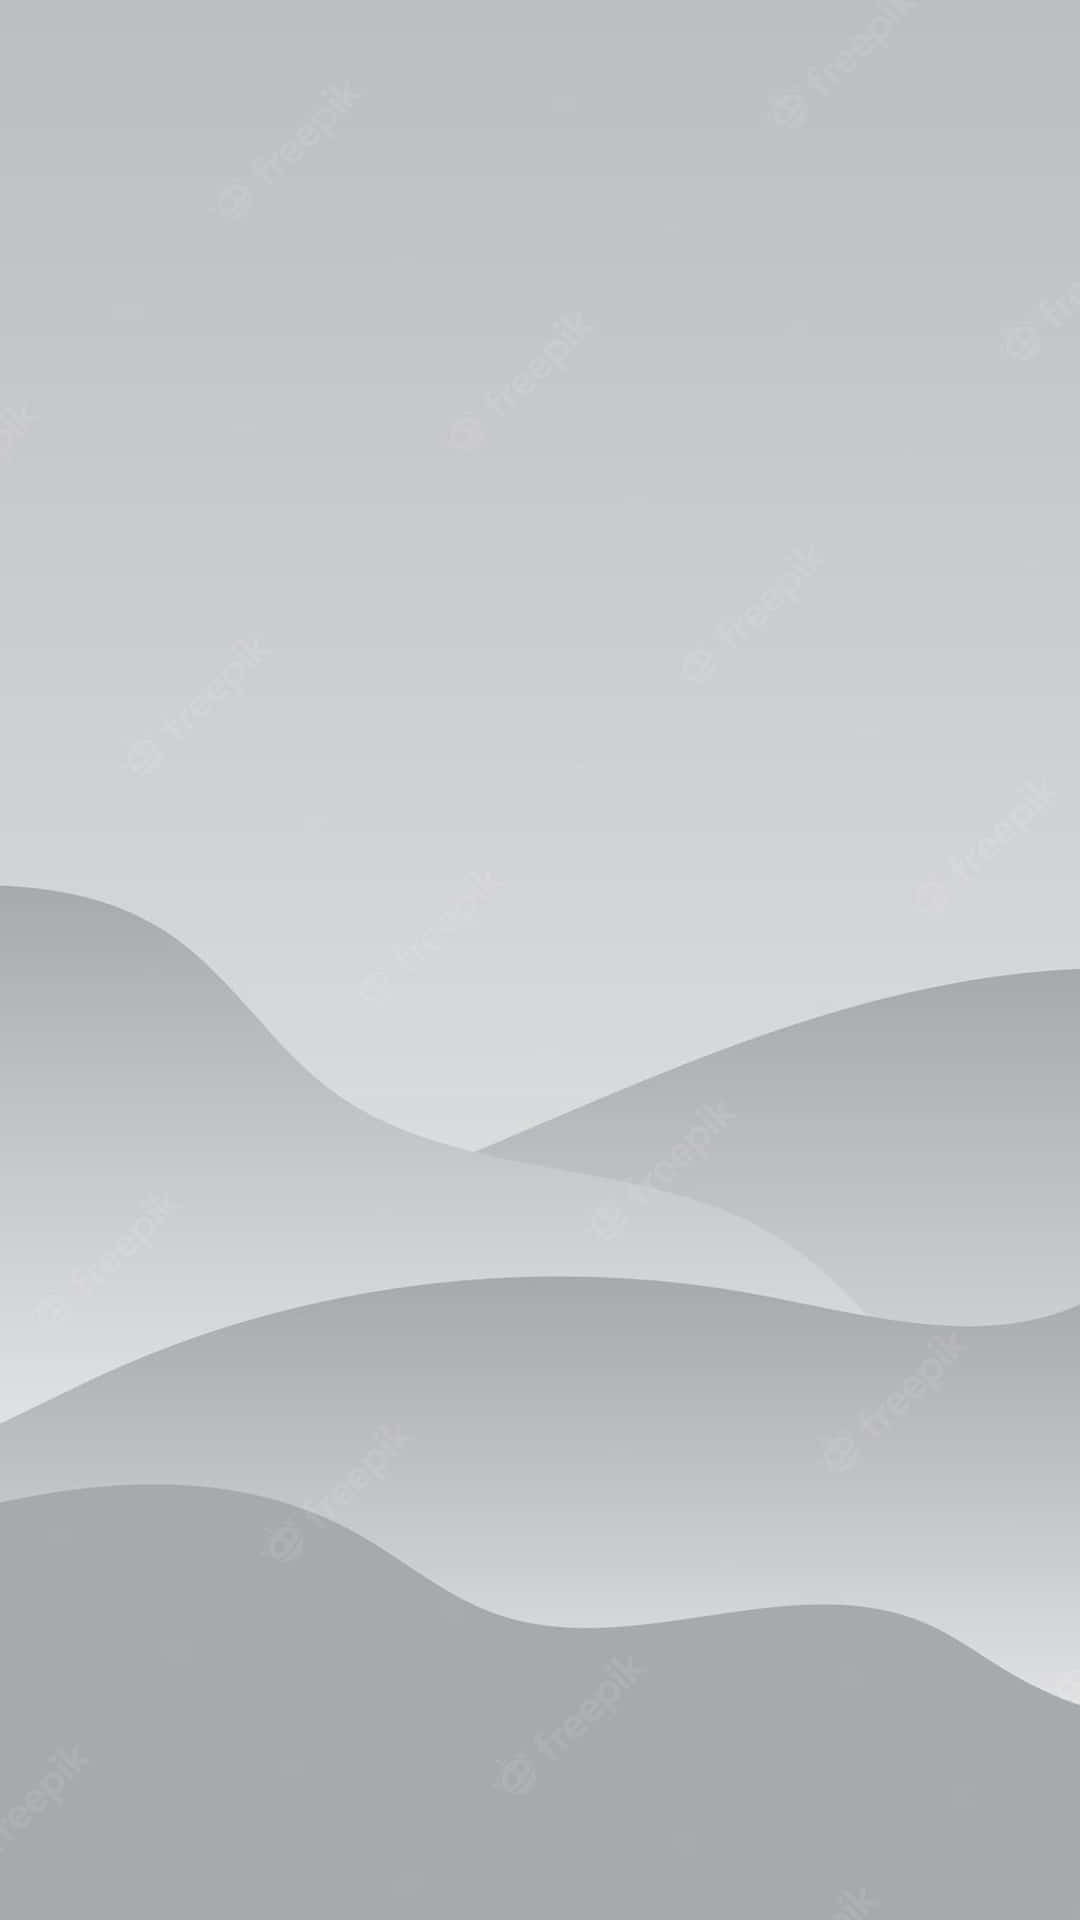 iPhone 11 Pro - Space Grey (Light) – Stock Wallpaper – Original from Apple  (Full HD) - Wallpapers Central